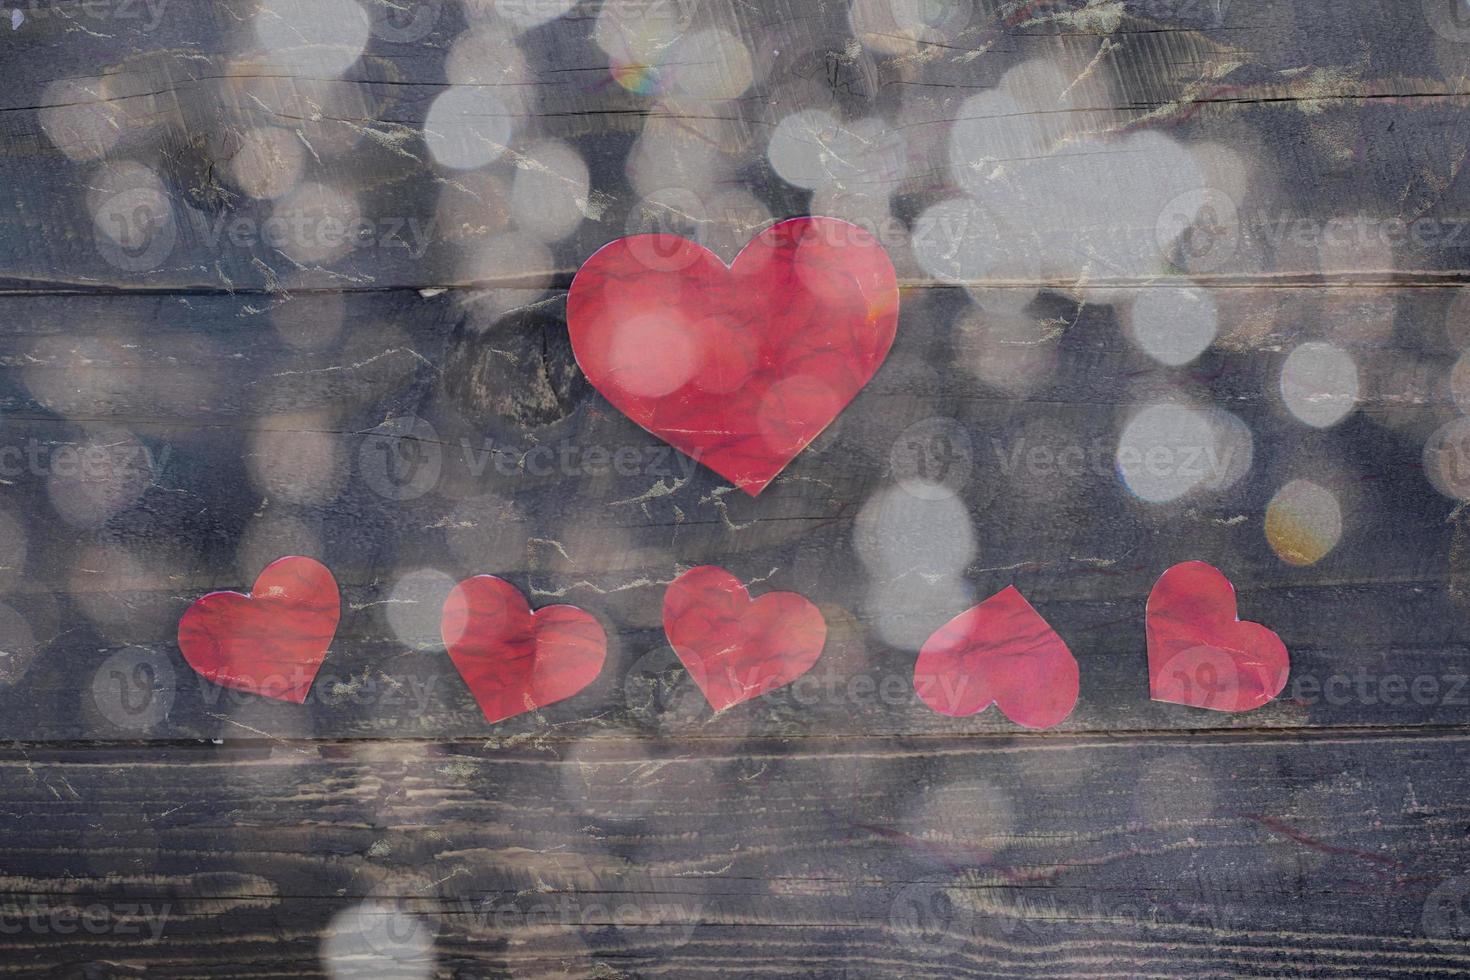 Happy Valentines day, paper hearts on wooden background with lights background photo